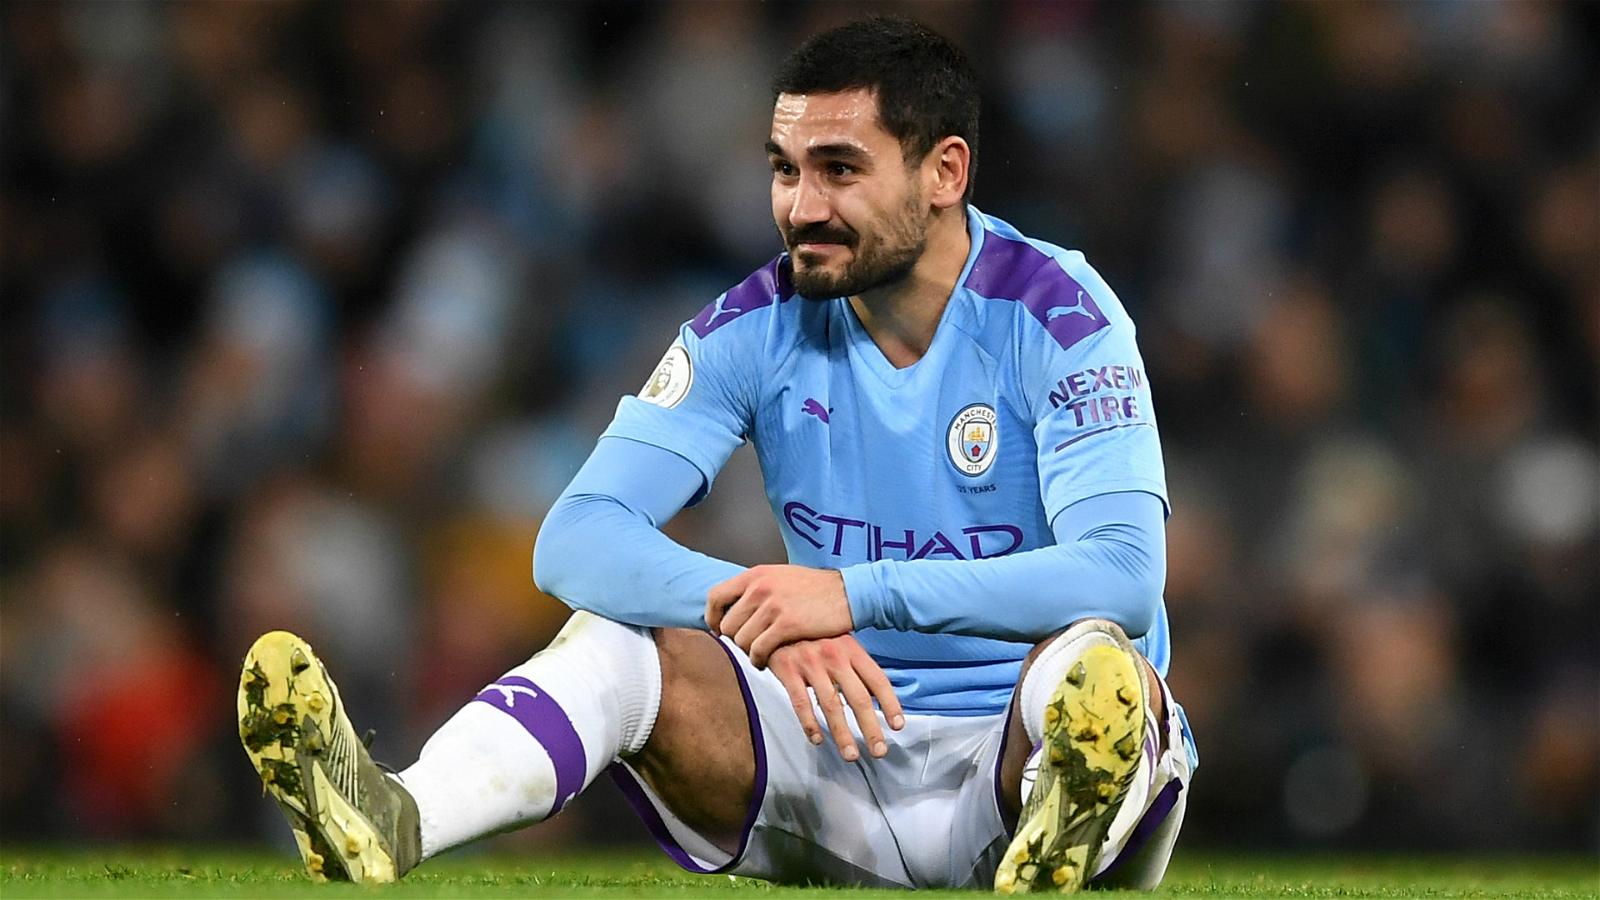 UCL FINAL: City face injury scare as Gundogan withdraws from training